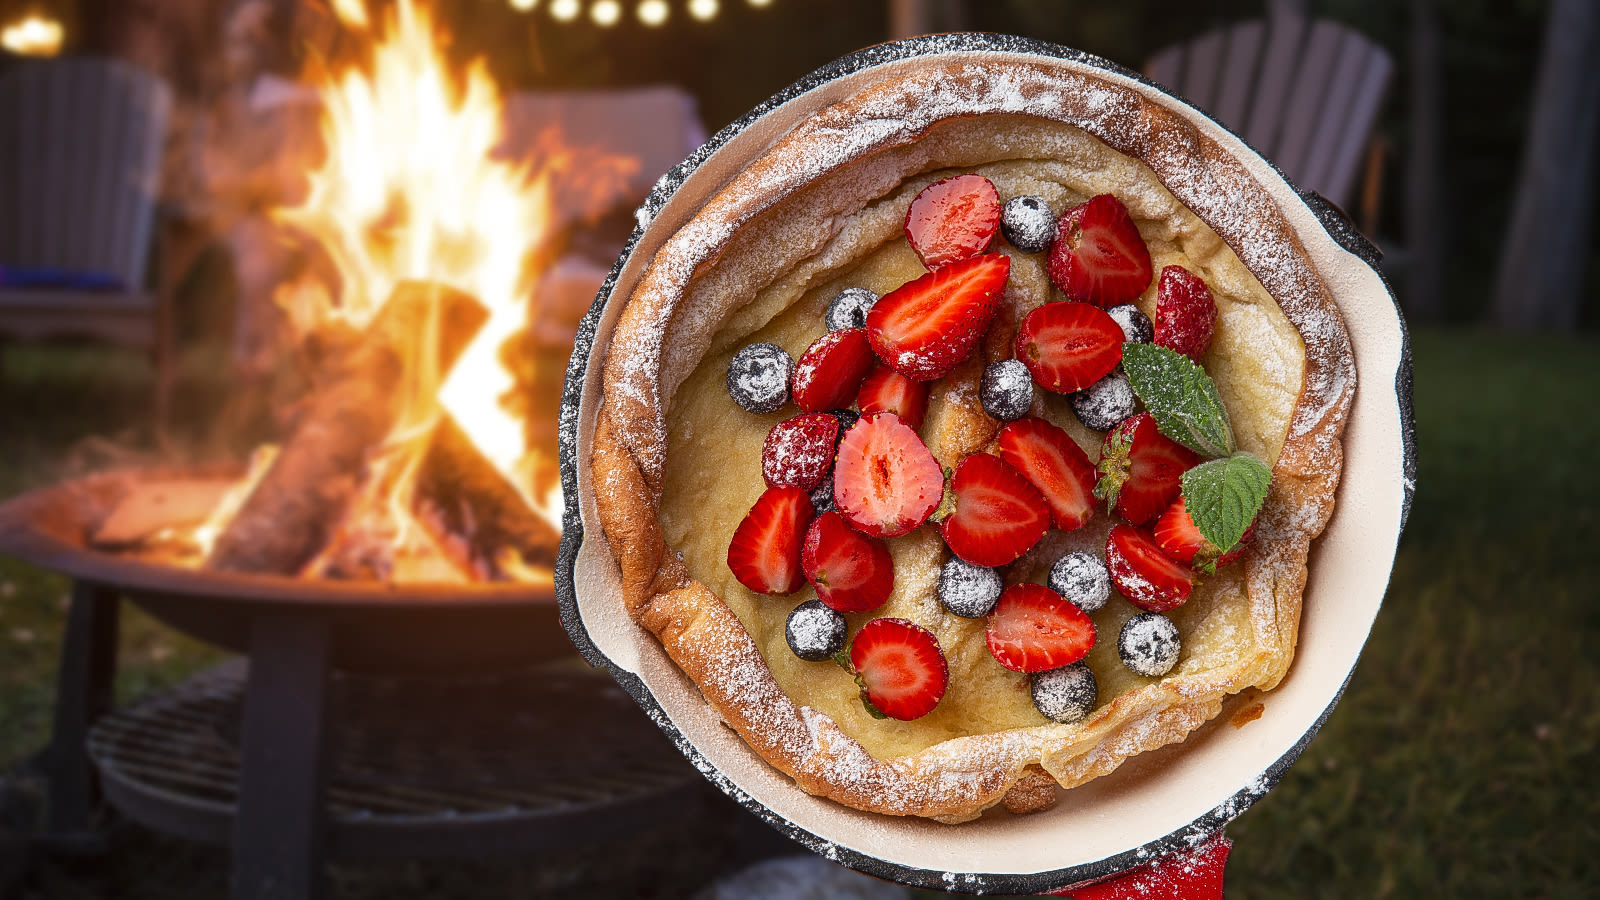 Dutch Babies Are The Perfect Smoked Dessert For Your Campfire Meals